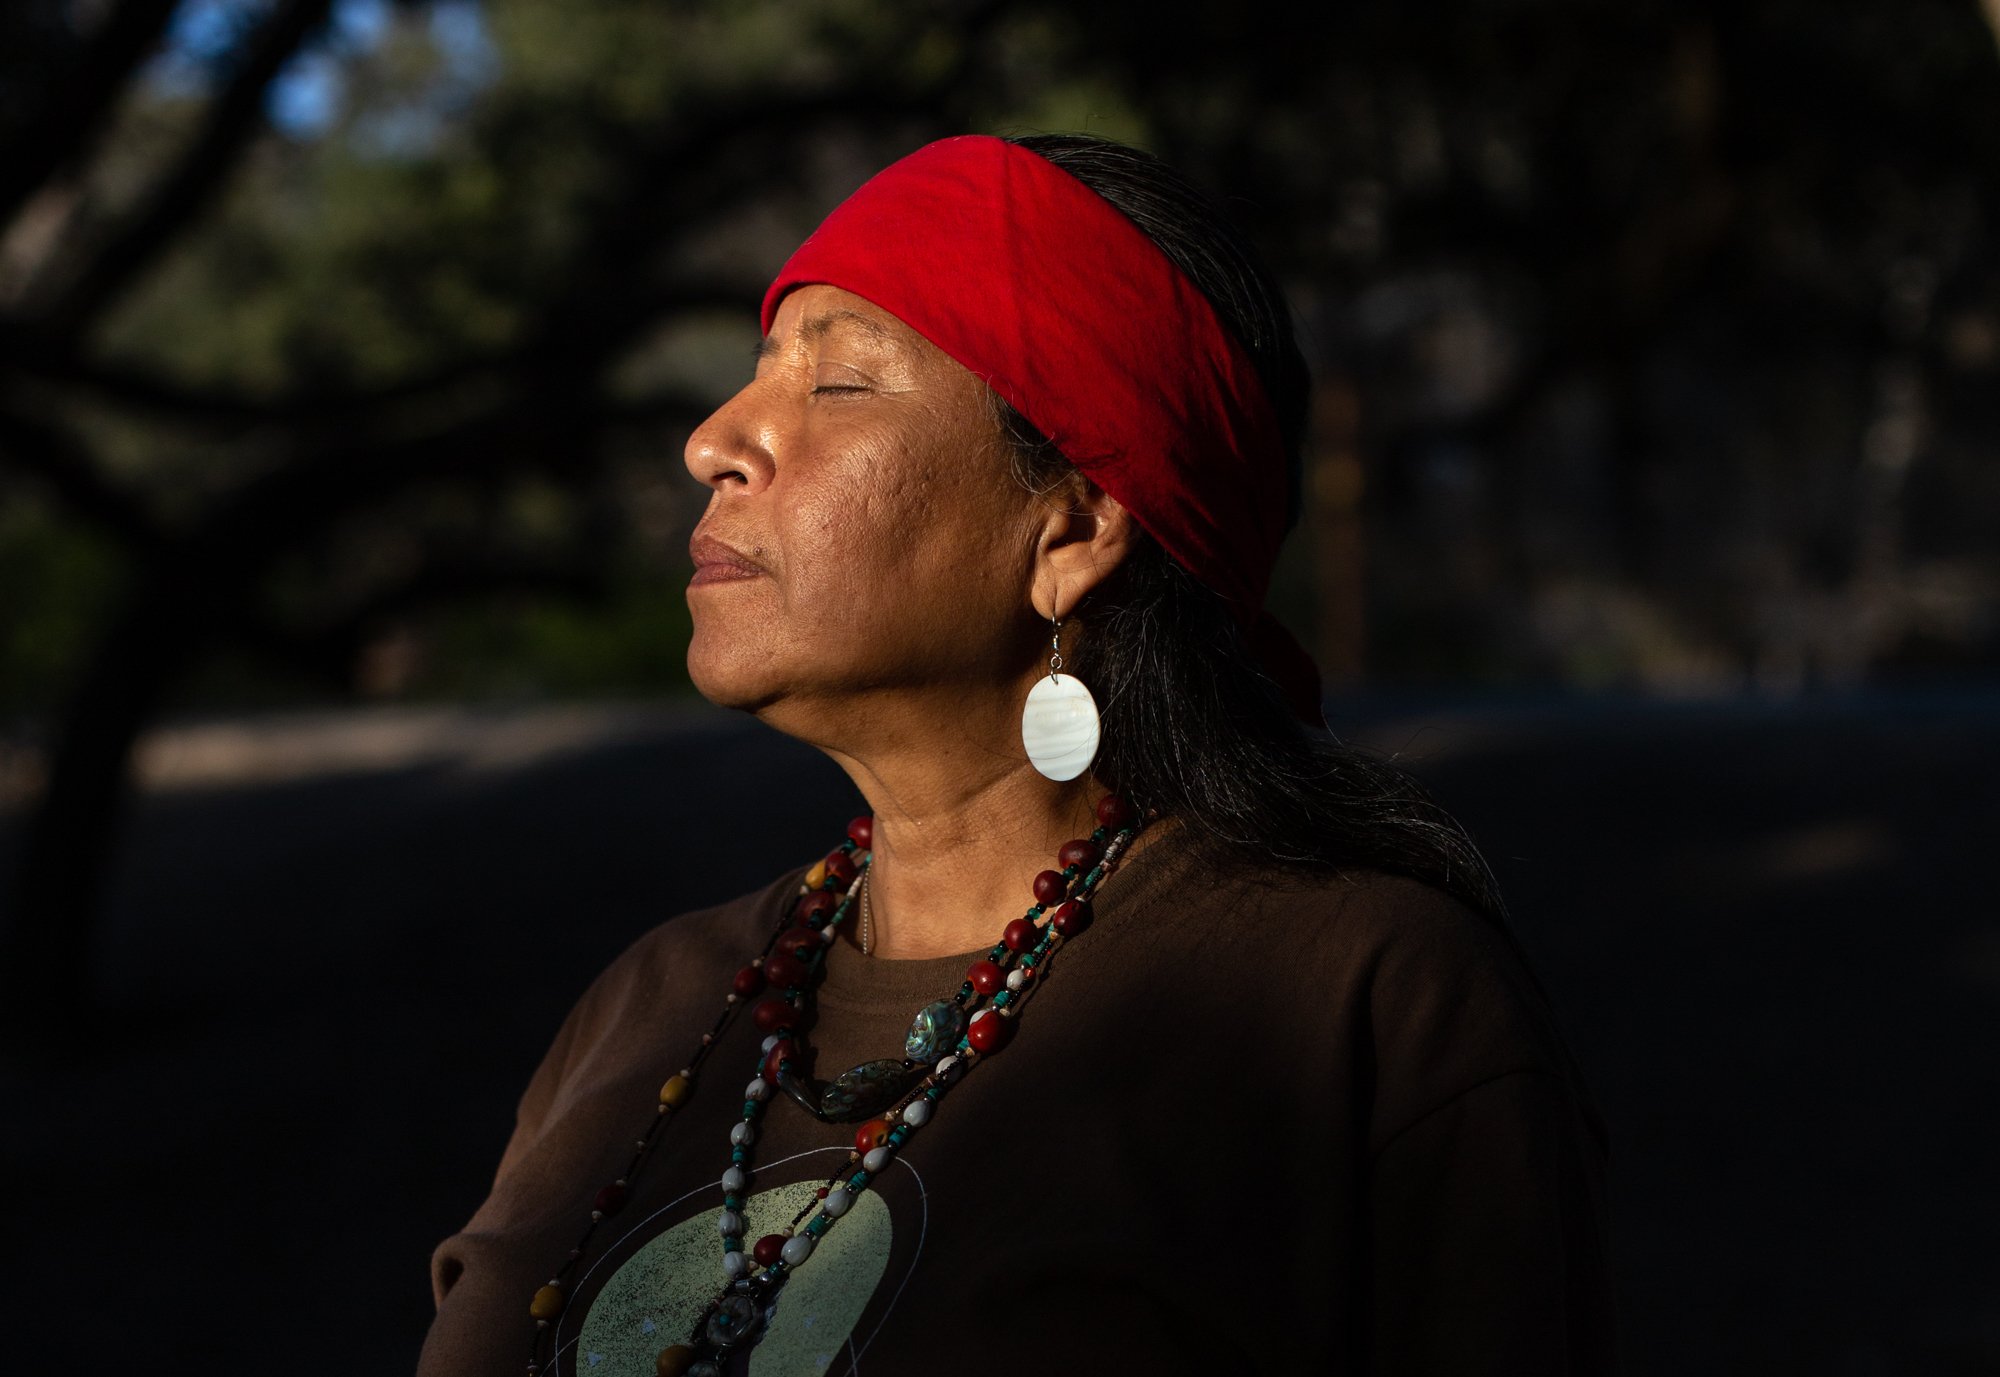 A Native American stands with a peaceful expression, eyes closed, wearing a red head covering and beaded necklace.